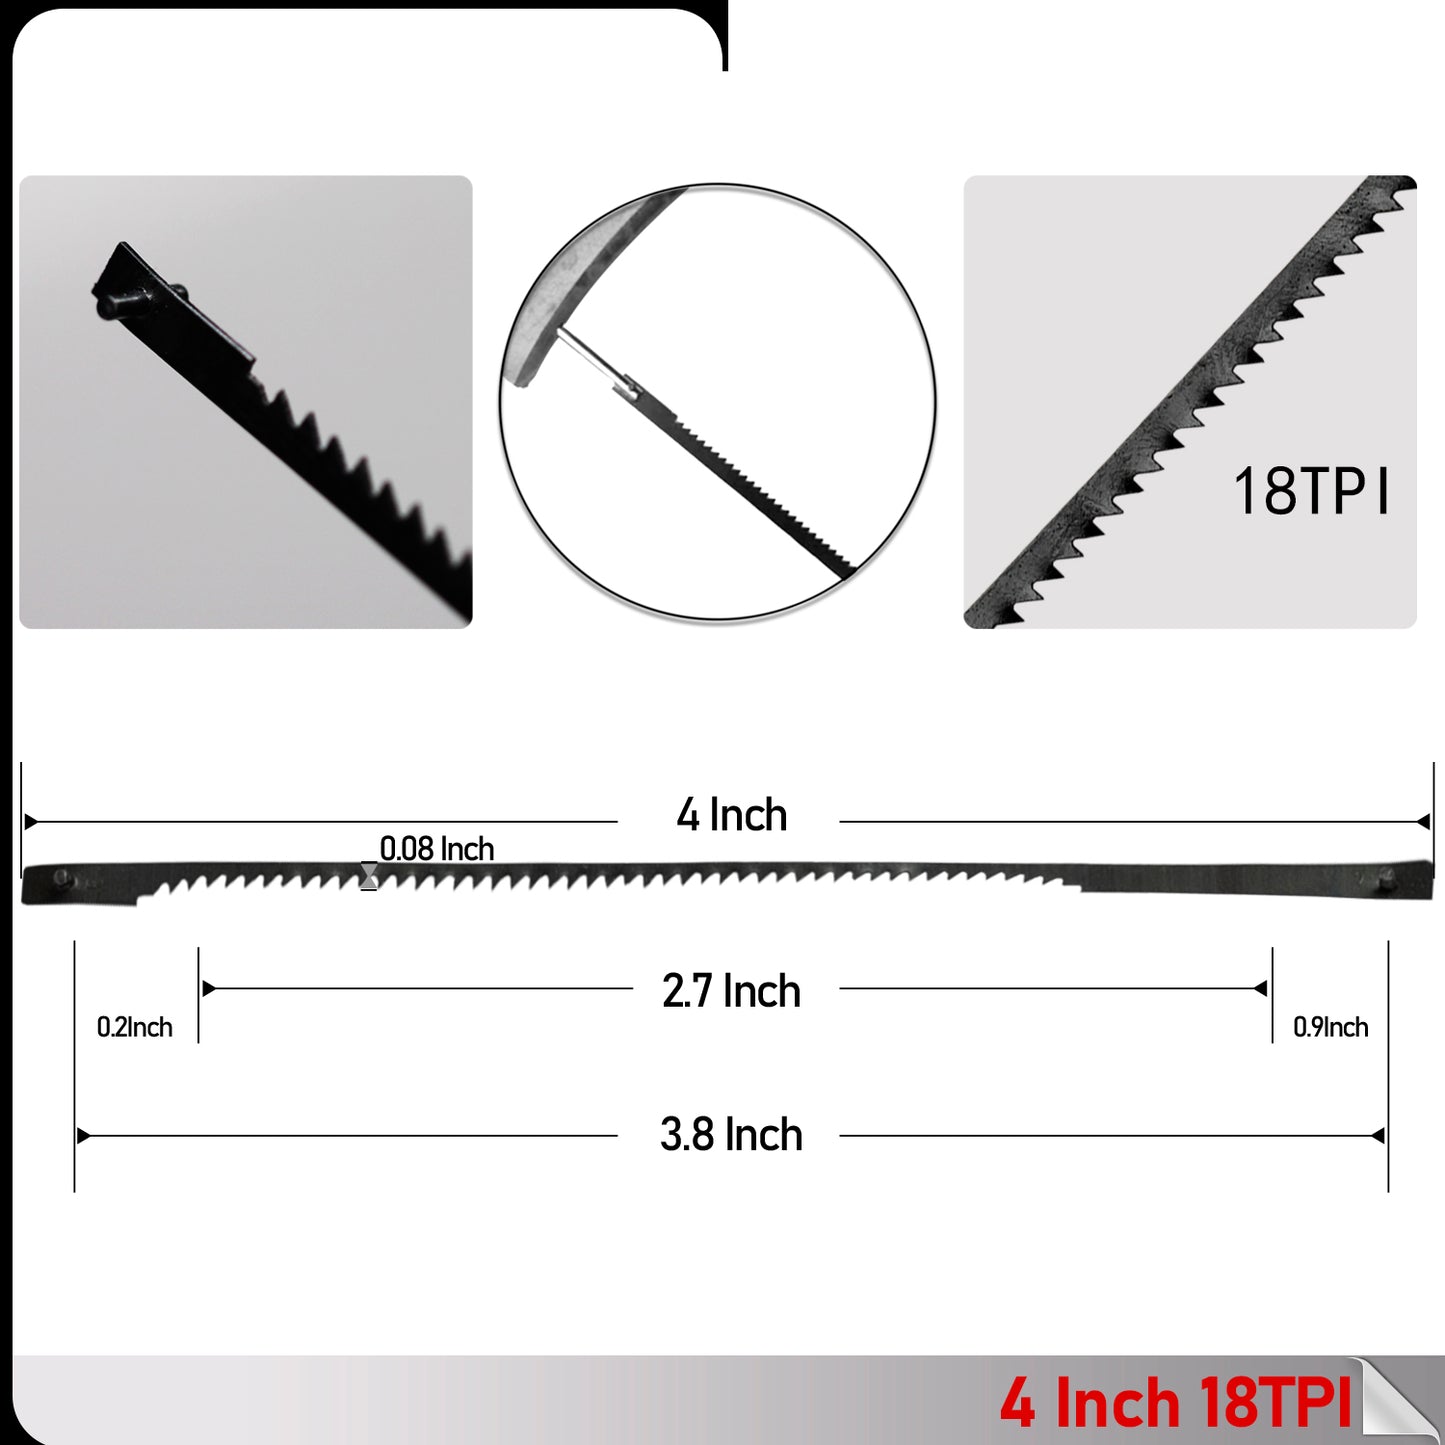 4 Inch 102mm Pin End Scroll Saw Blades for New Dremel Moto-Saw MS20 MS20-01 MS51-01 MS52-01 MS53-01 MSSB53 Woodworking Power Tools 15TPI 90°/ 15TPI/ 18TPI/ 24 TPI-50 Pcs